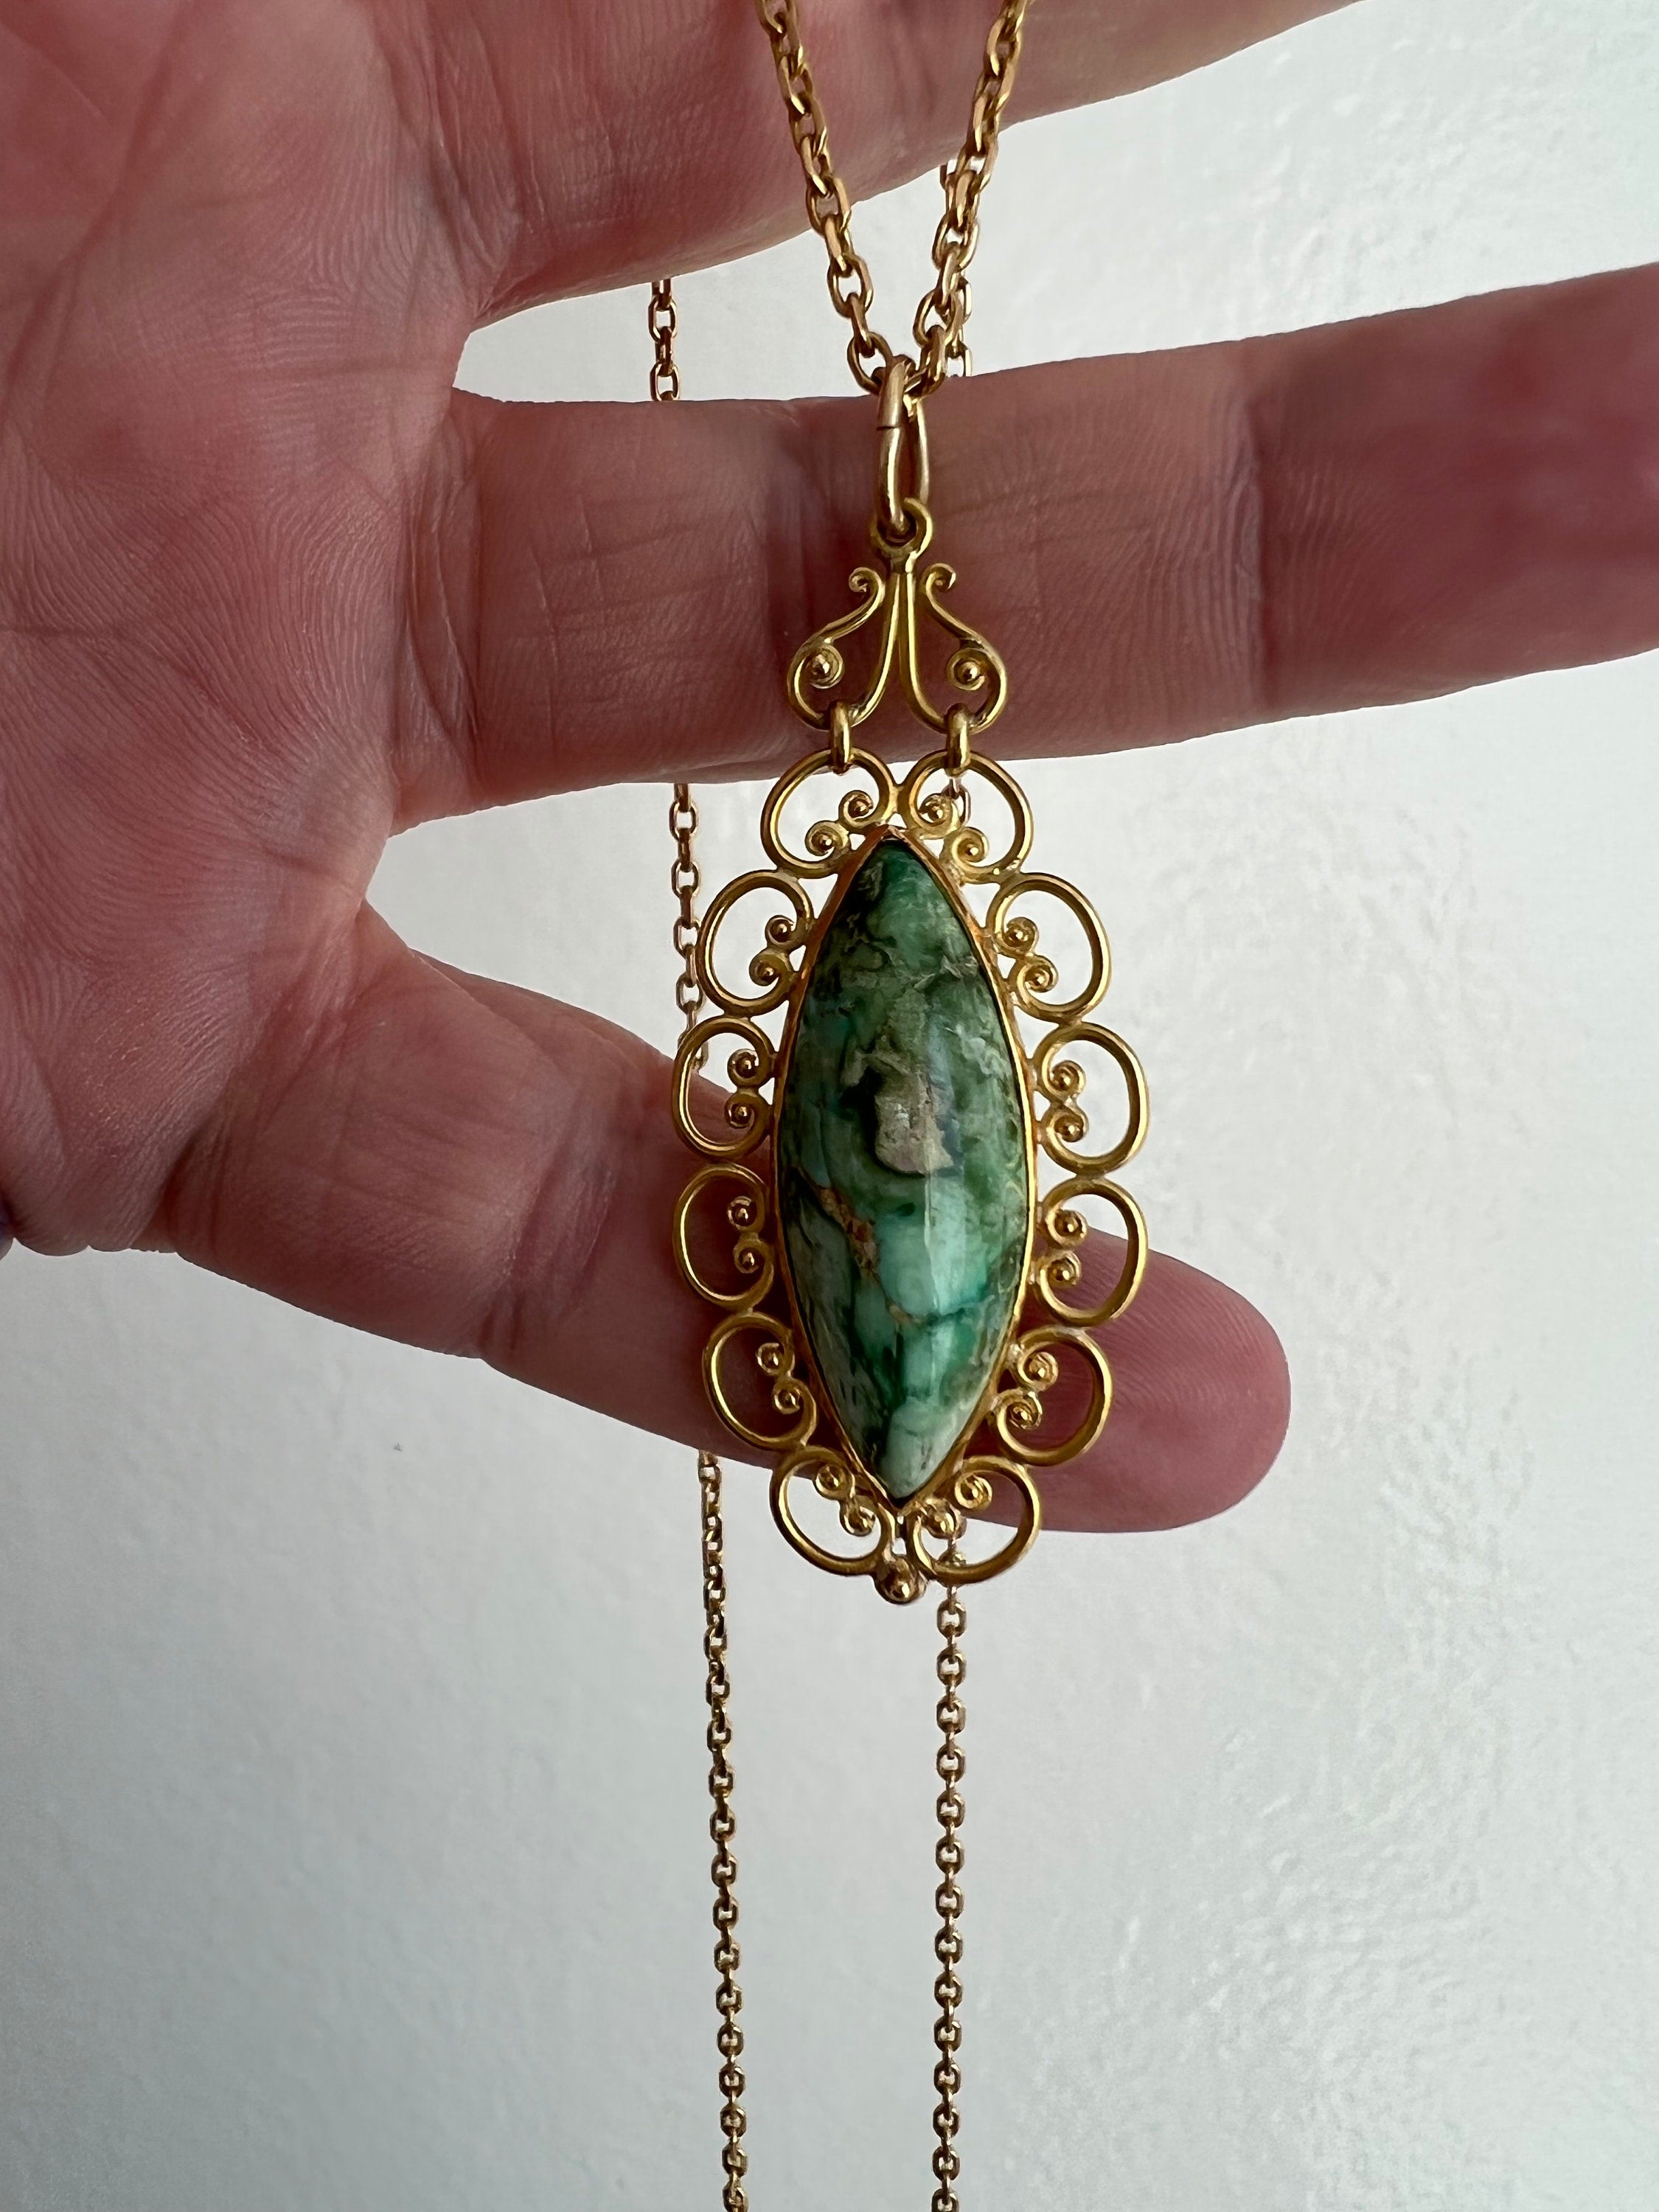 Vintage 18K Yellow Gold Turquoise Pendant and Long Chain.